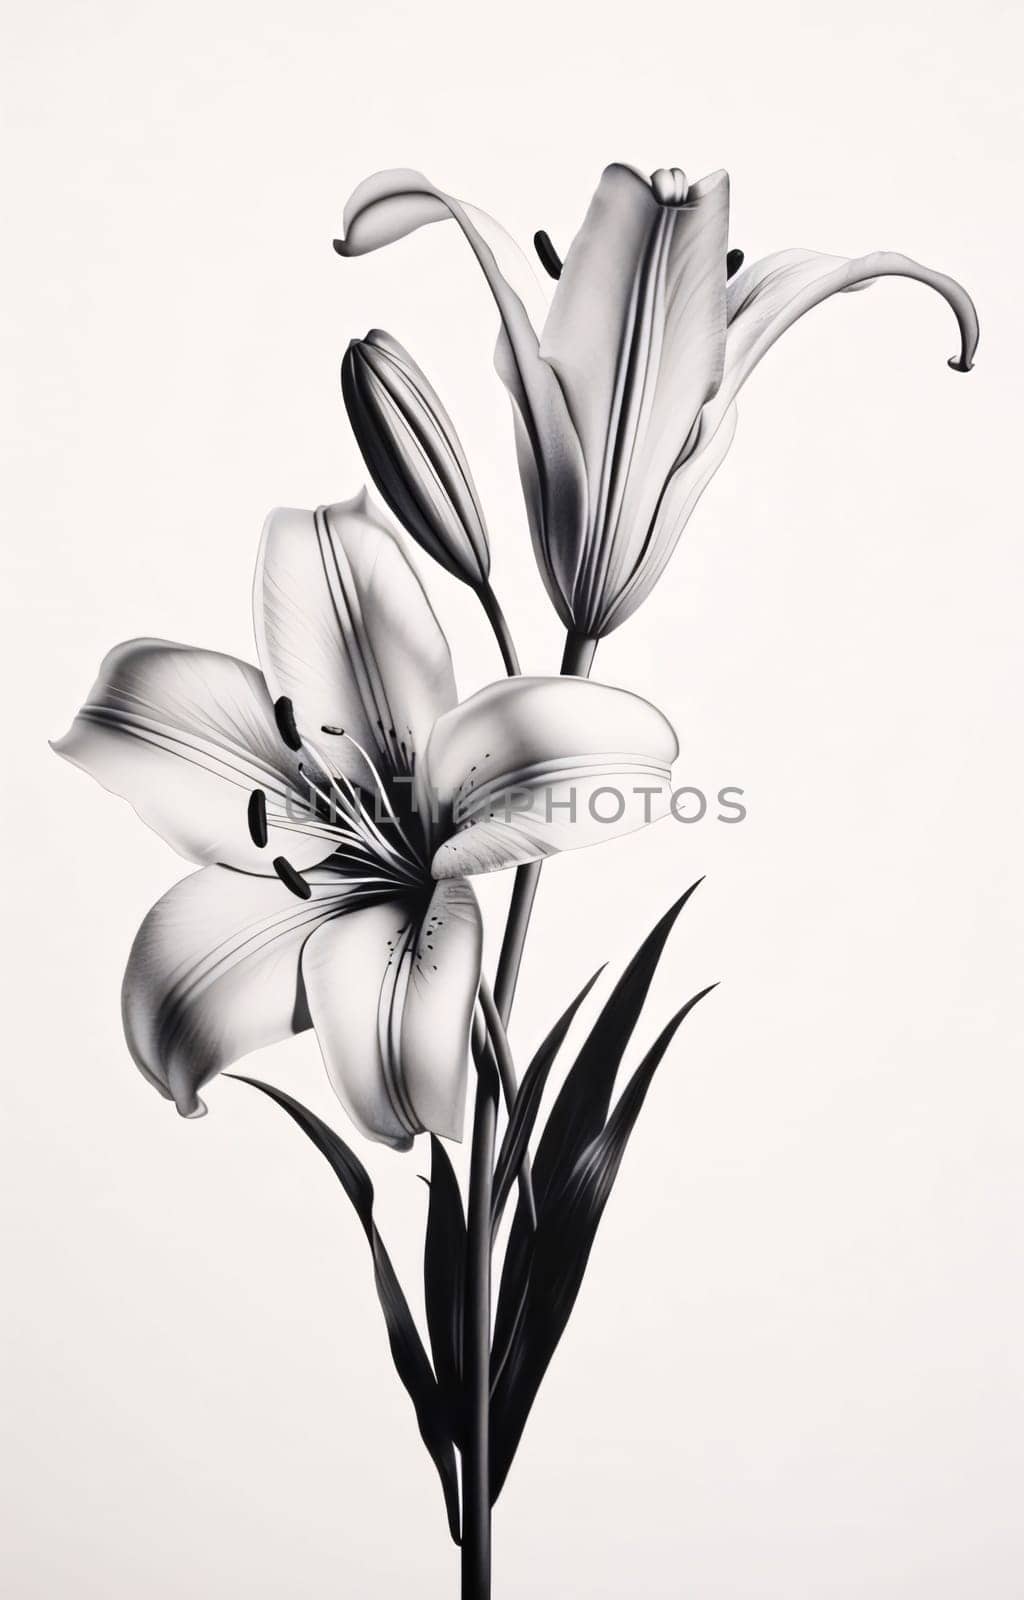 Black and white lilies on a white background. flower, leaves, stem. Flowering flowers, a symbol of spring, new life. A joyful time of nature waking up to life.